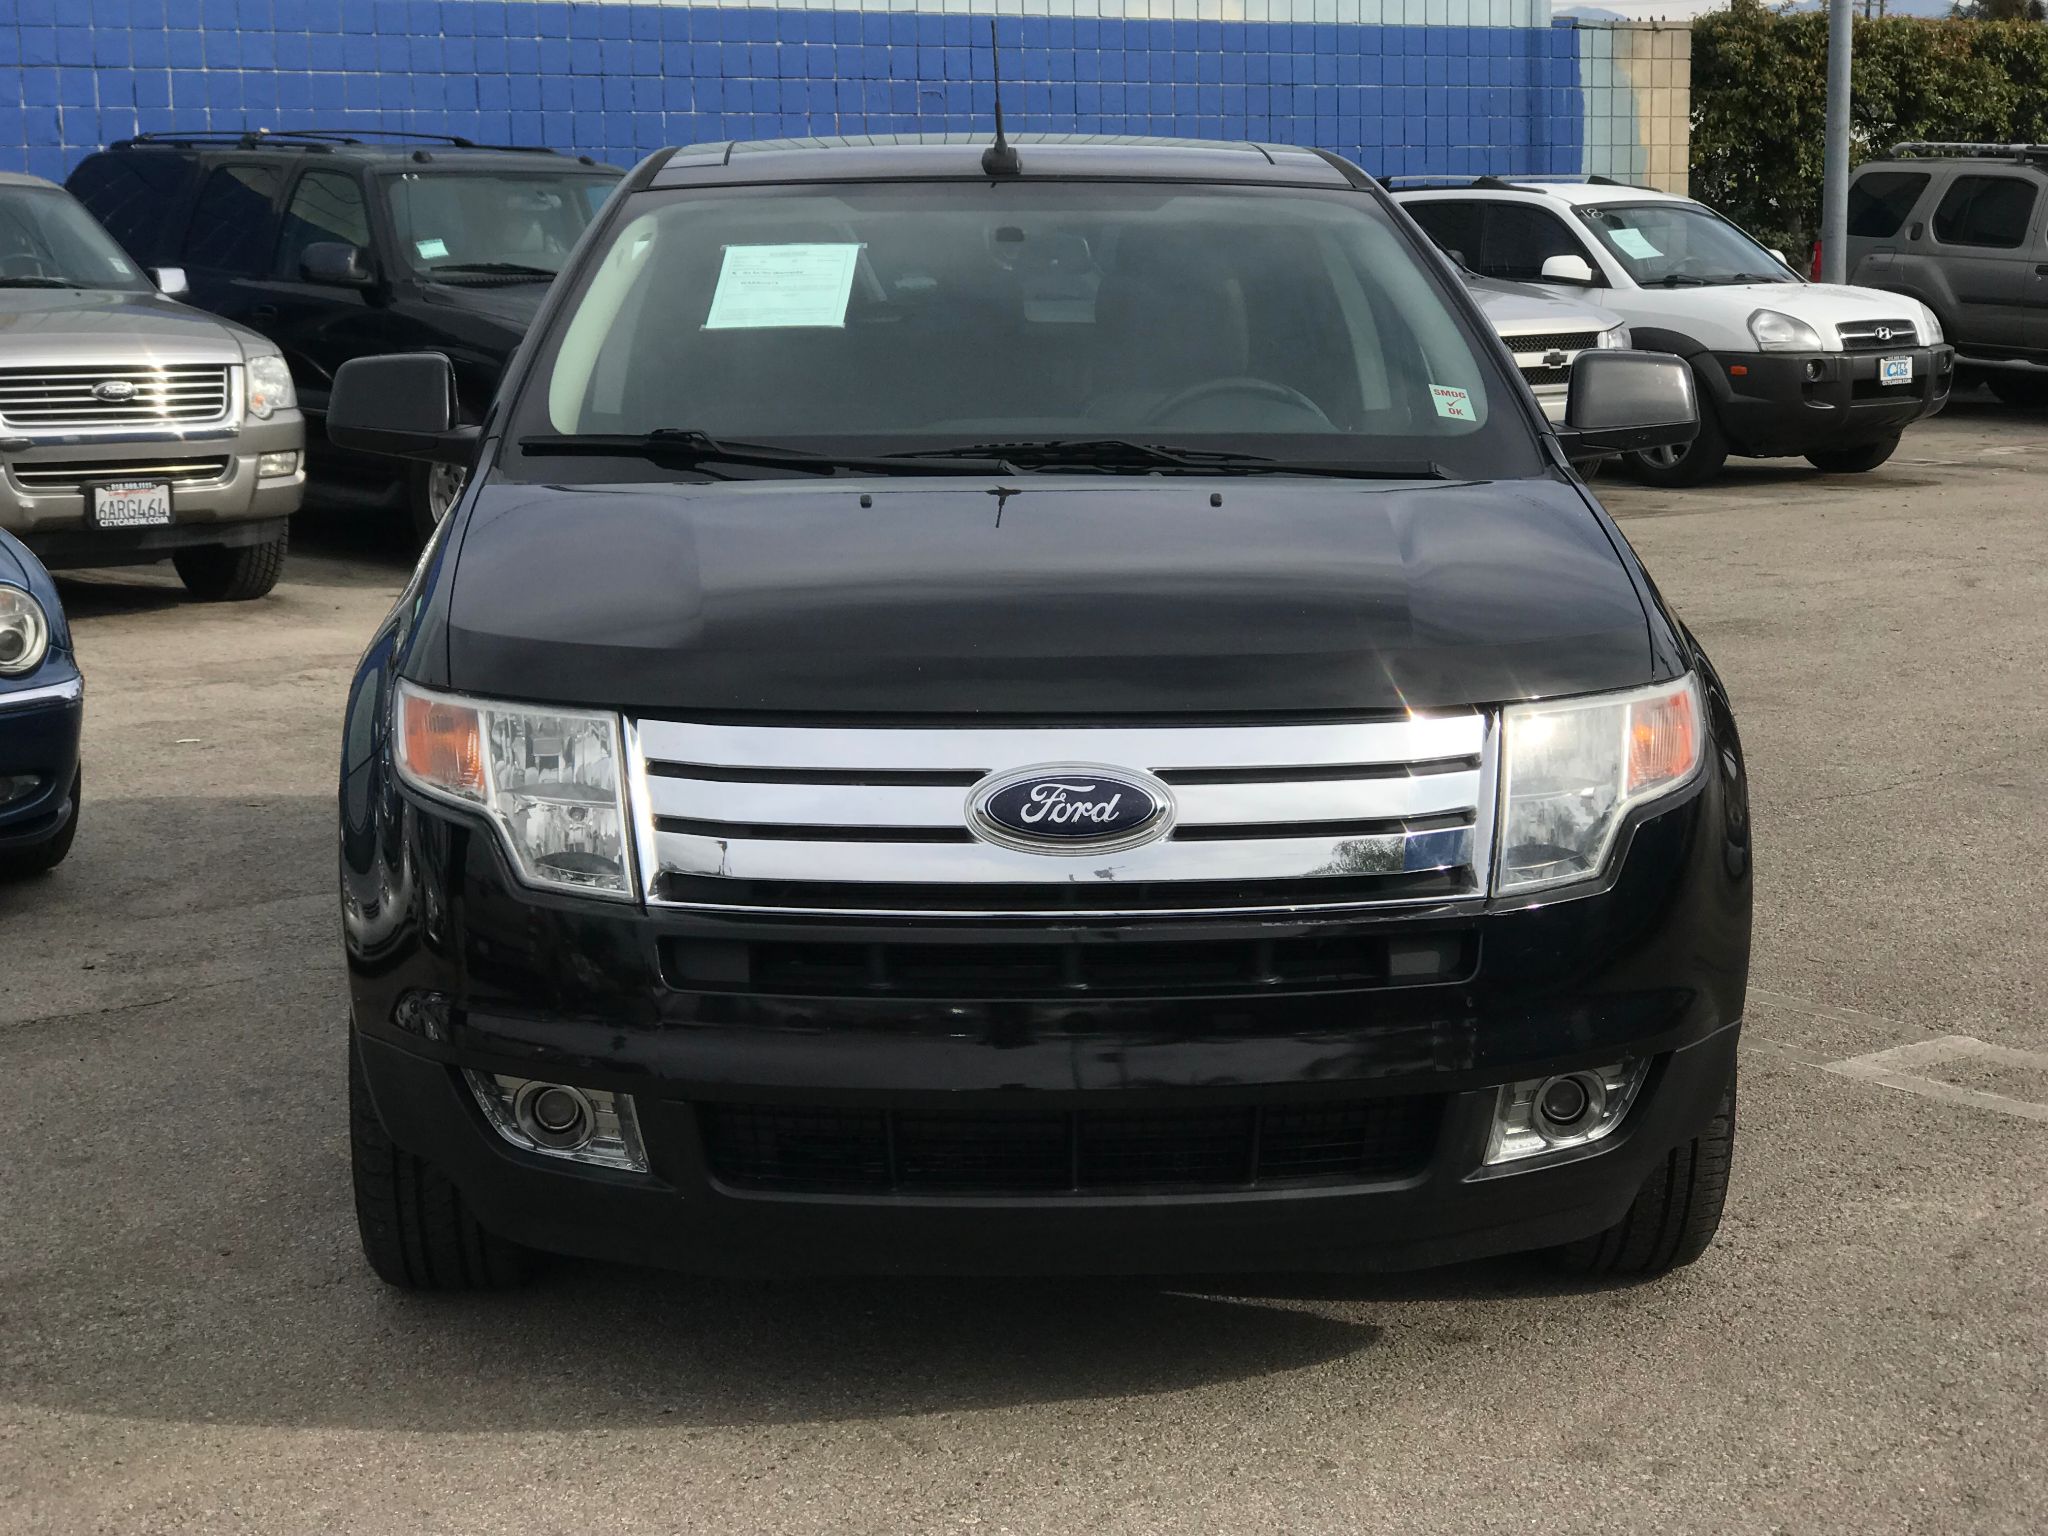 Used 2008 Ford Edge Limited at City Cars Warehouse INC